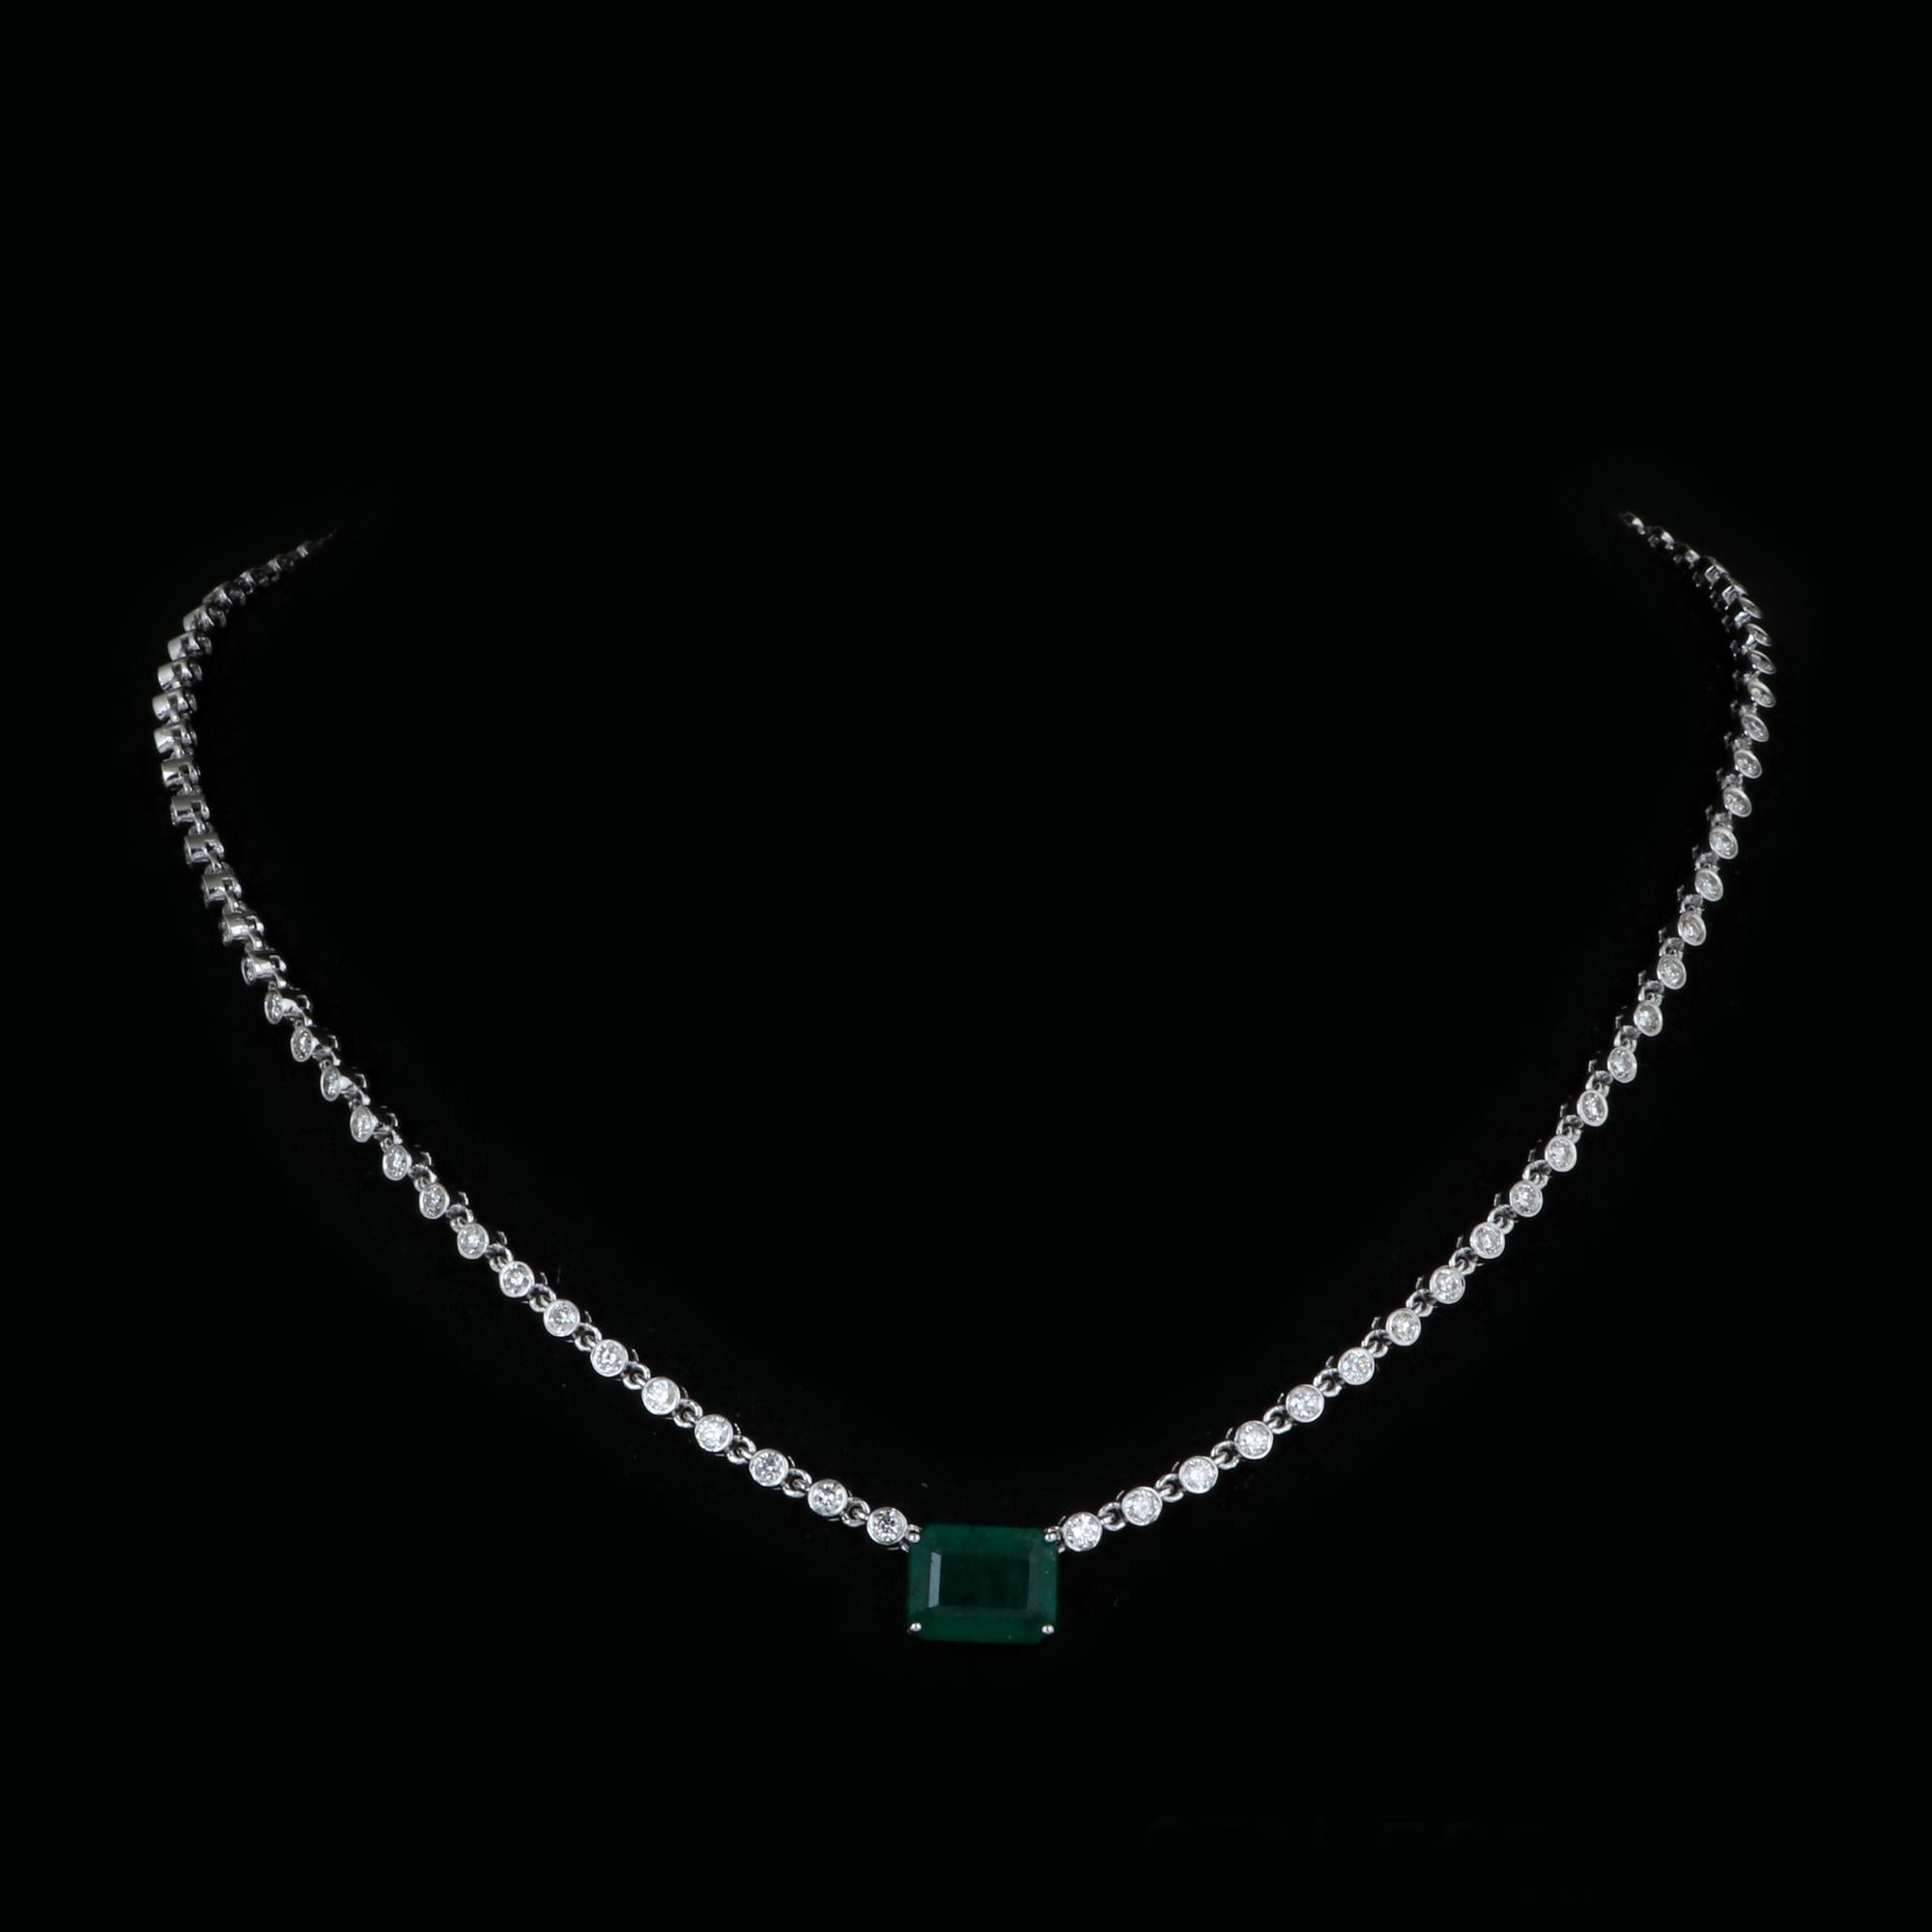 Women's Natural Emerald Diamond Charm Necklace 14k White Gold Handmade Fine Jewelry For Sale